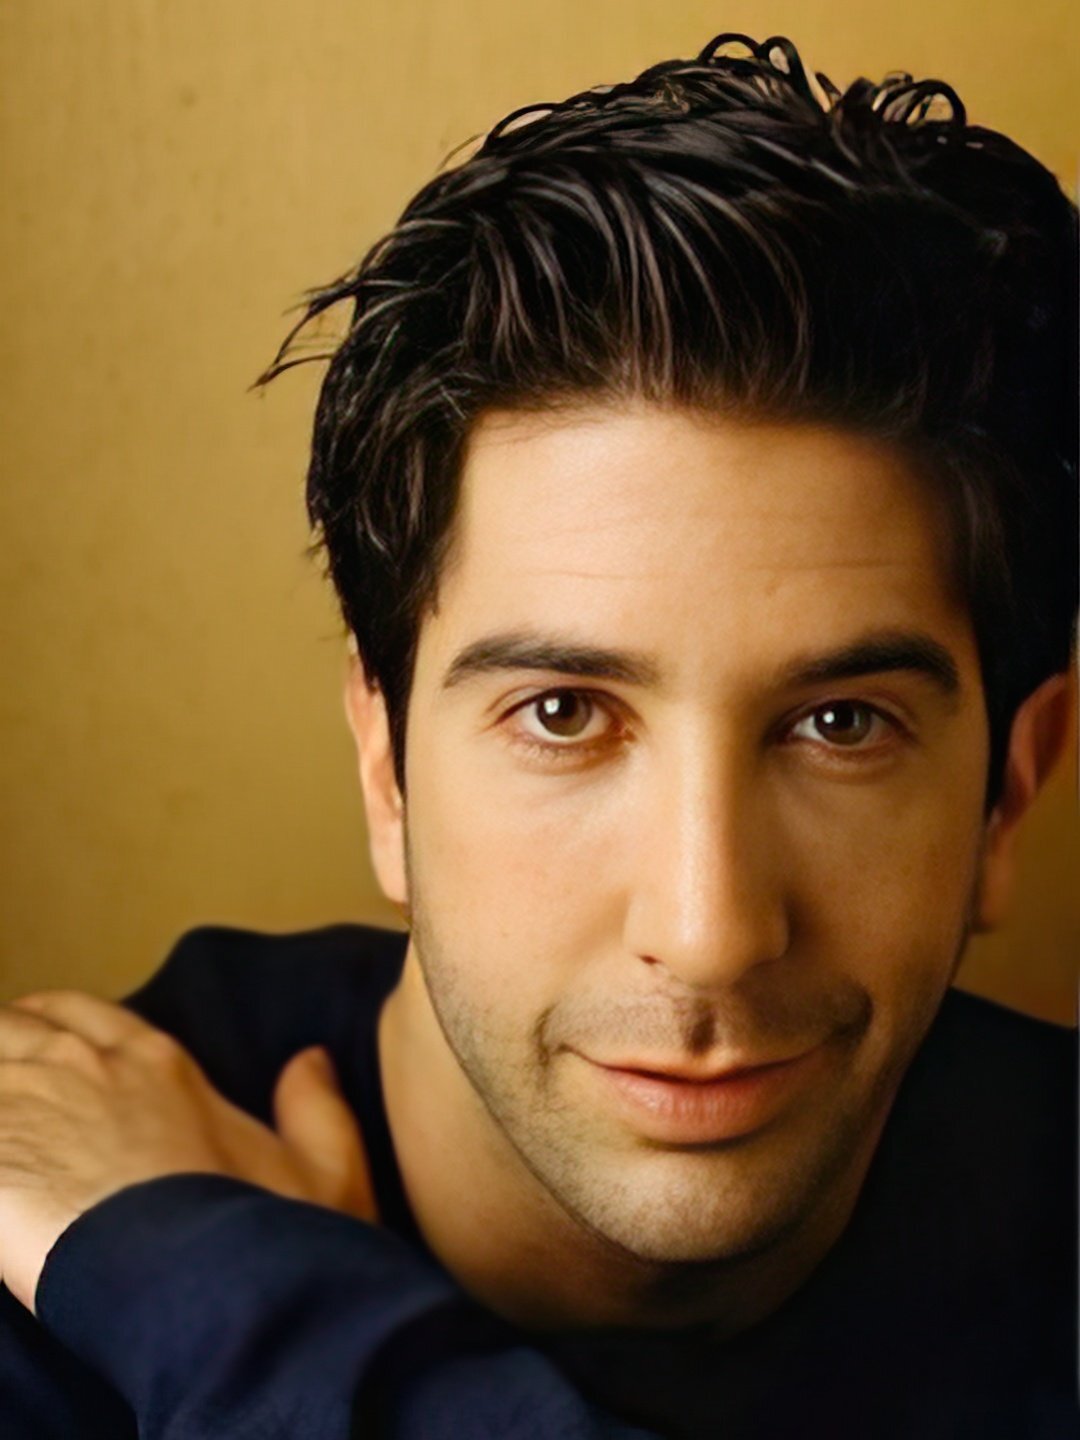 David Schwimmer early life